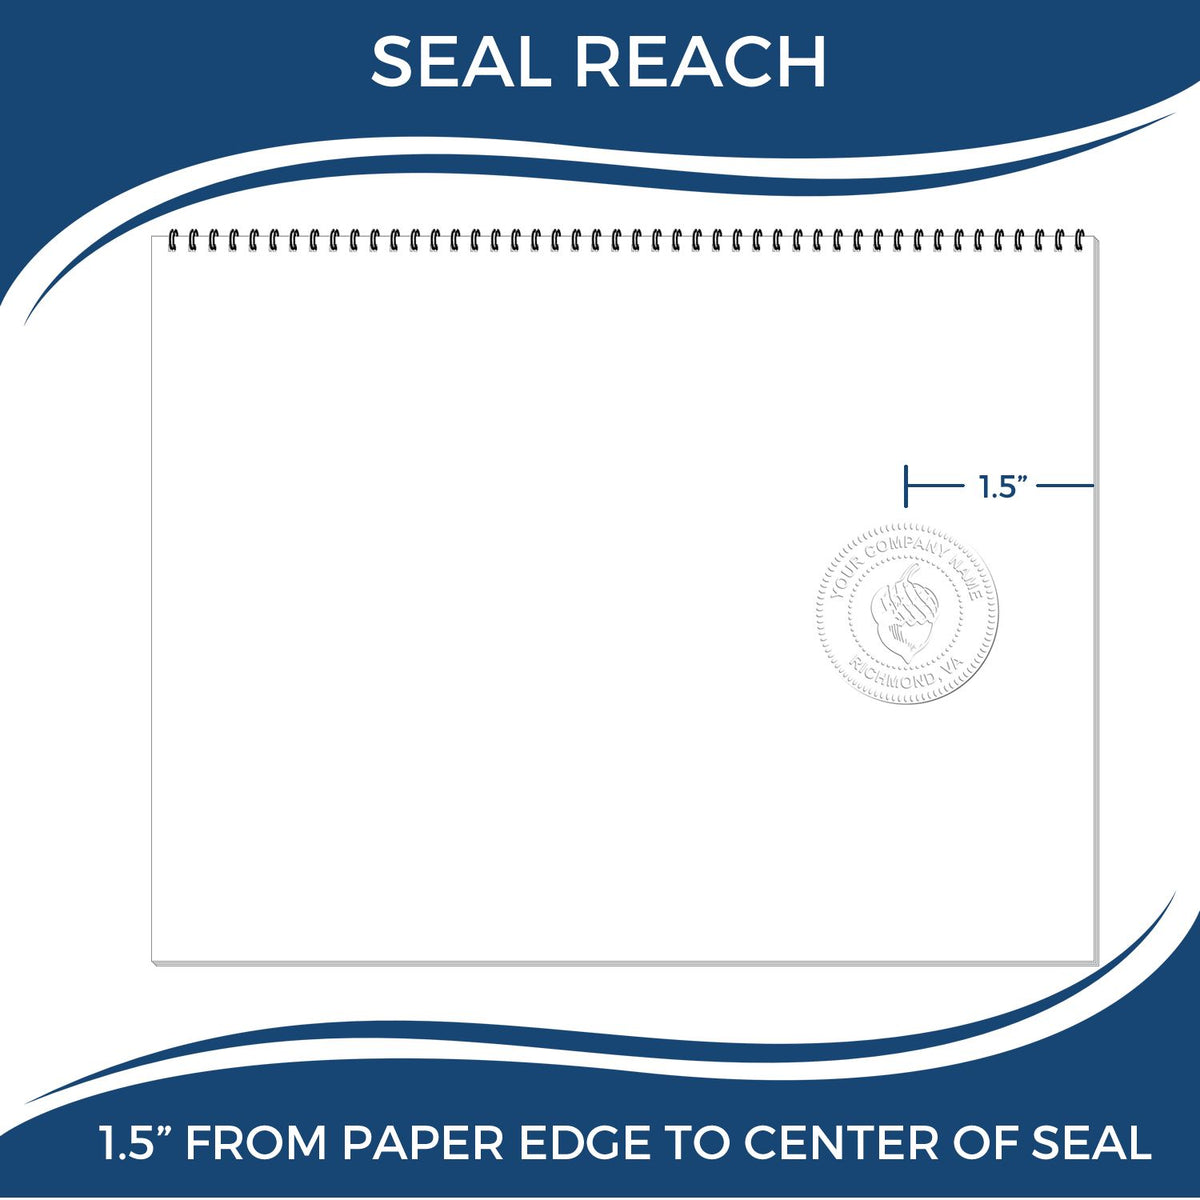 An infographic showing the seal reach which is represented by a ruler and a miniature seal image of the Gift Maryland Geologist Seal